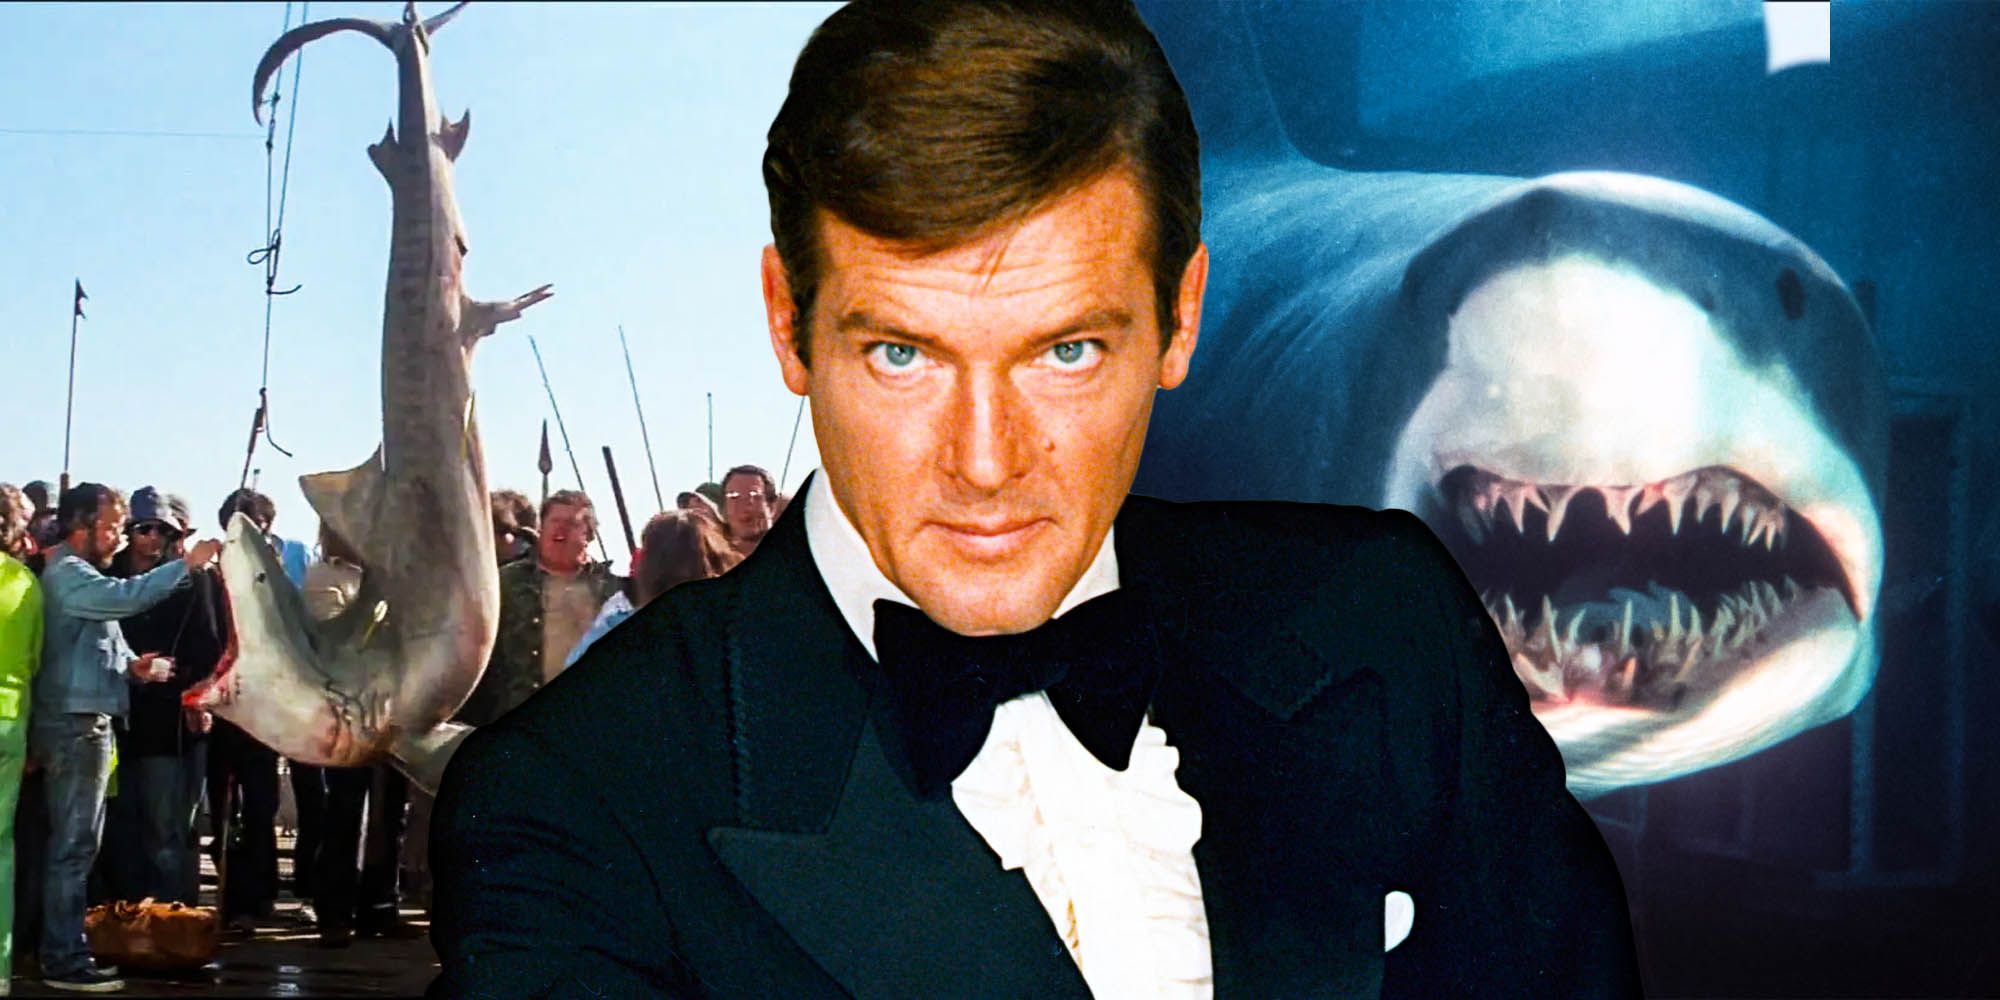 Roger moore The James Bond Easter Egg Linking Jaws To Deep Blue Sea